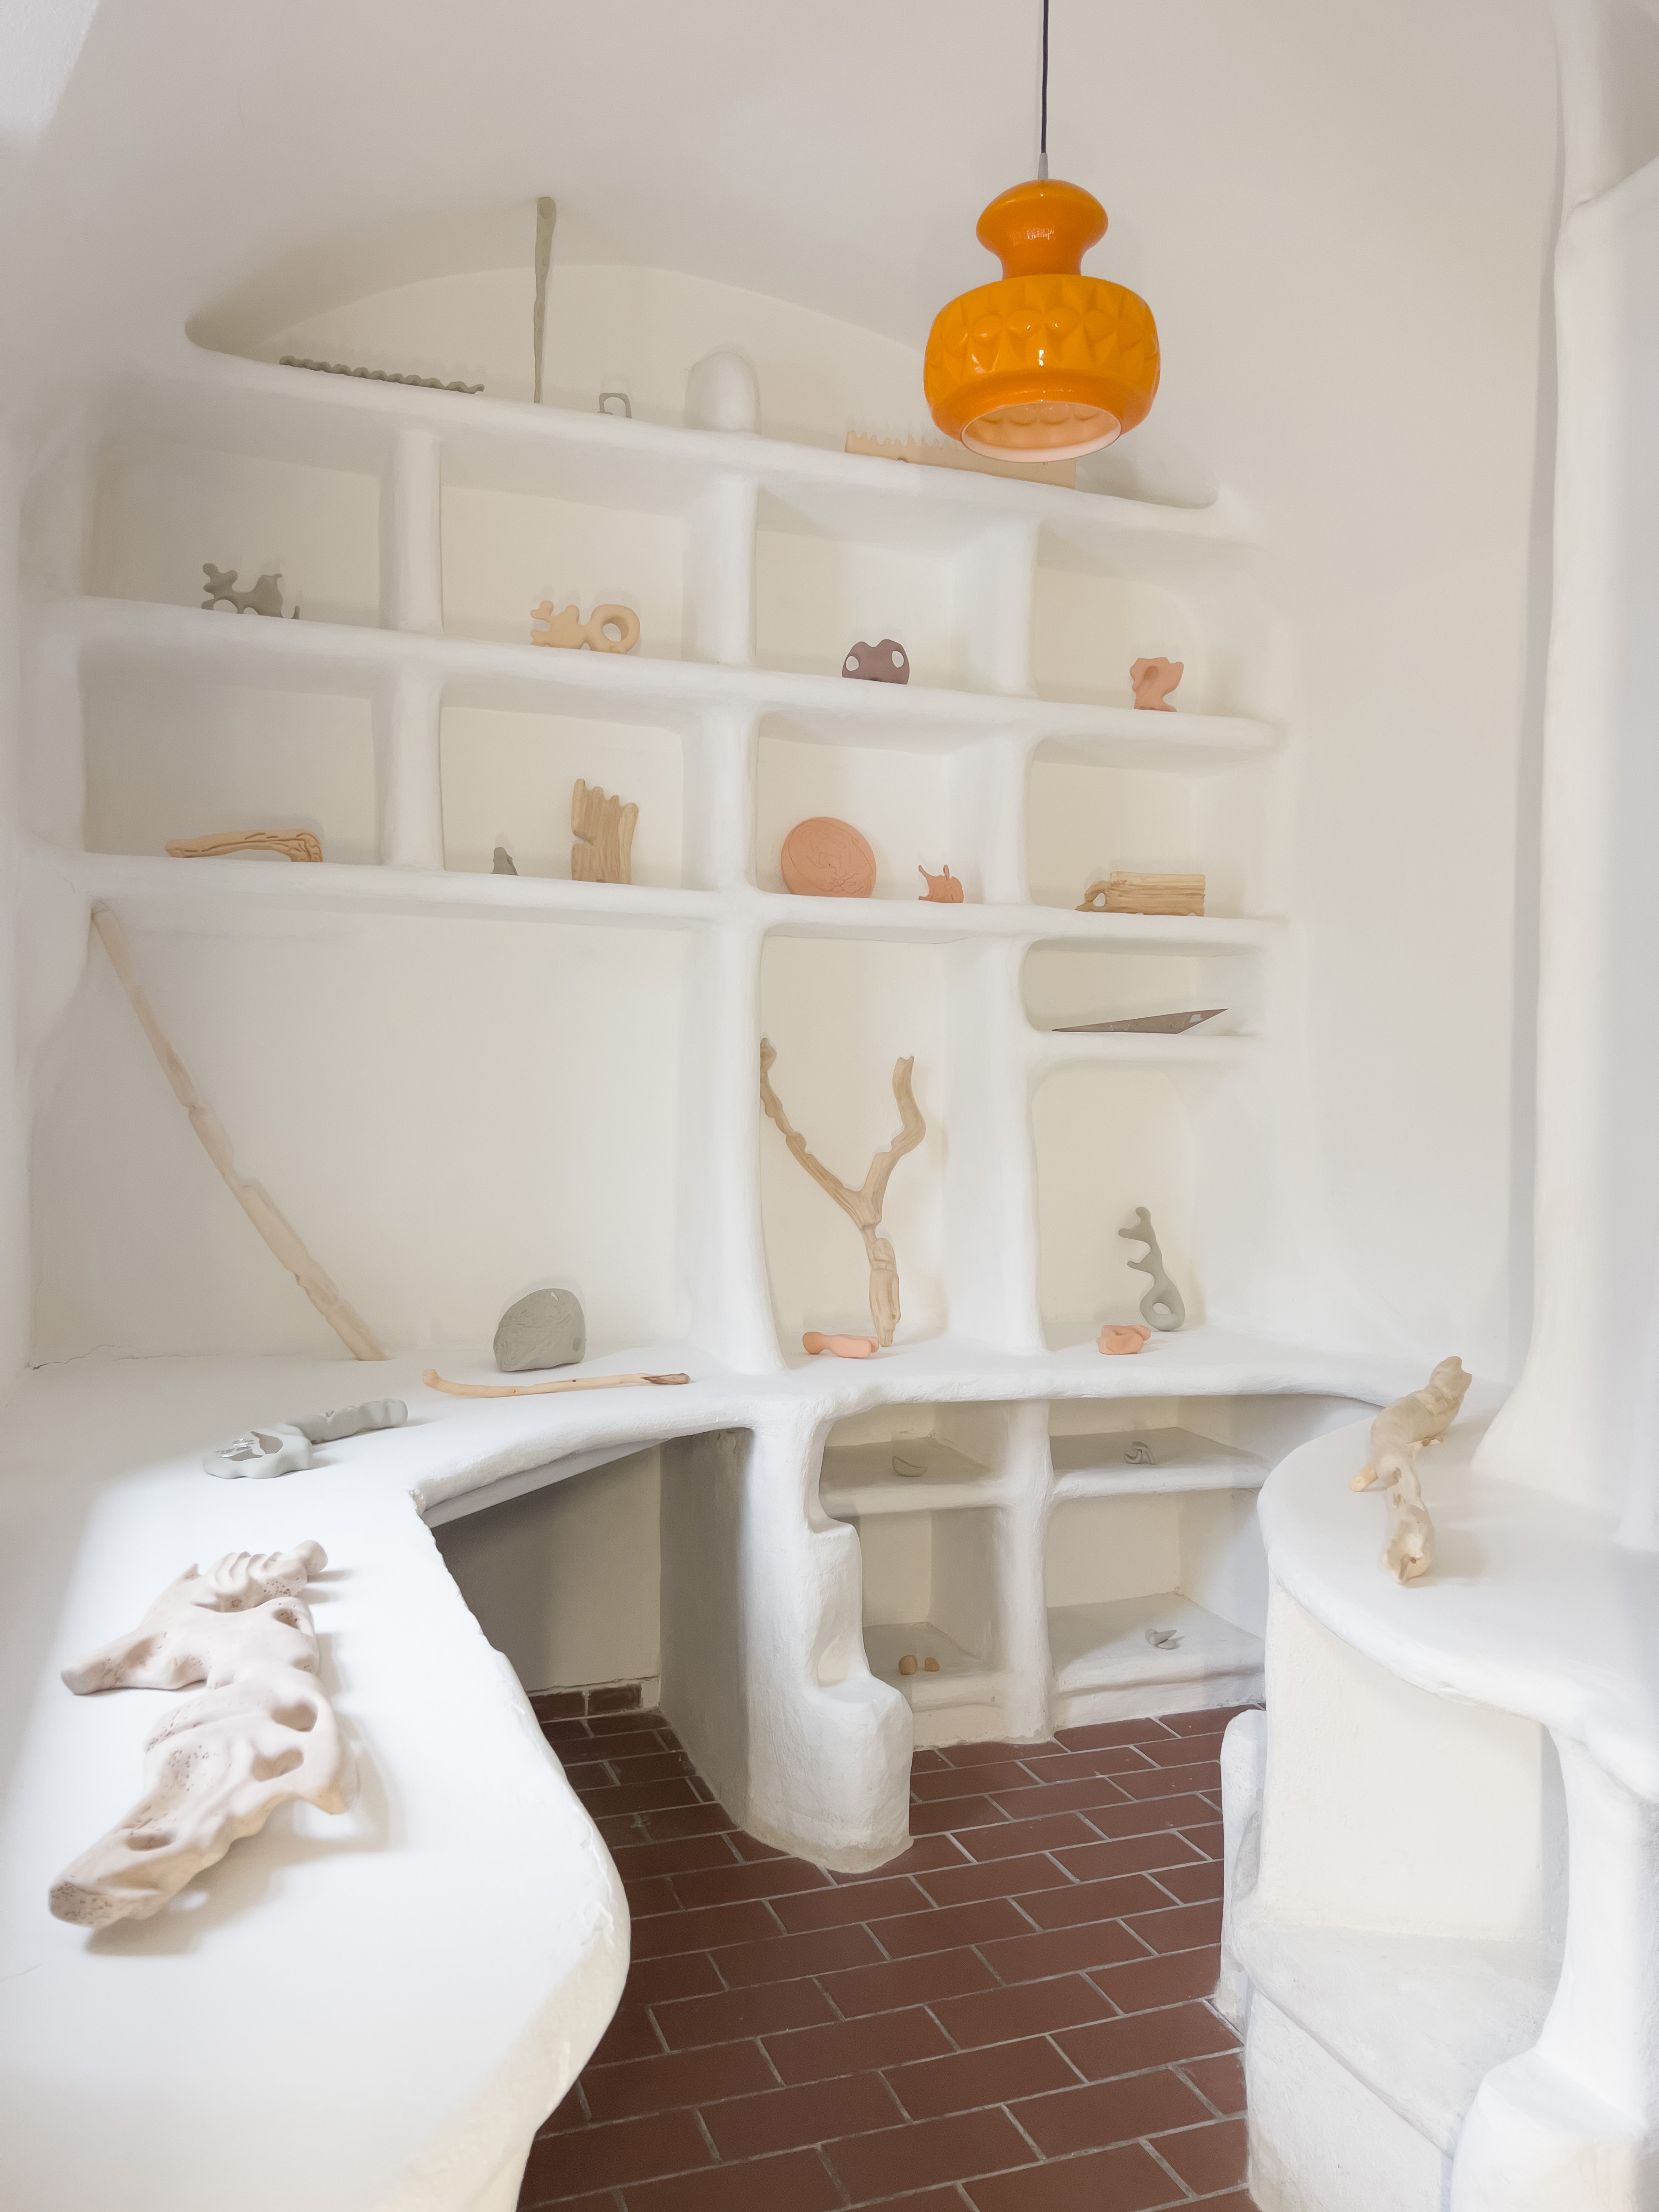 Photo of an art installation called Hands (and Other Products of Labor) 2.0 by Klára Čermáková (Common Space, Altes Spital, Viechtach, Germany) [Front view]. Several smaller art objects are displayed on organically shaped white shelves, initially serving as Pharmacy storage inside a small city hospital.